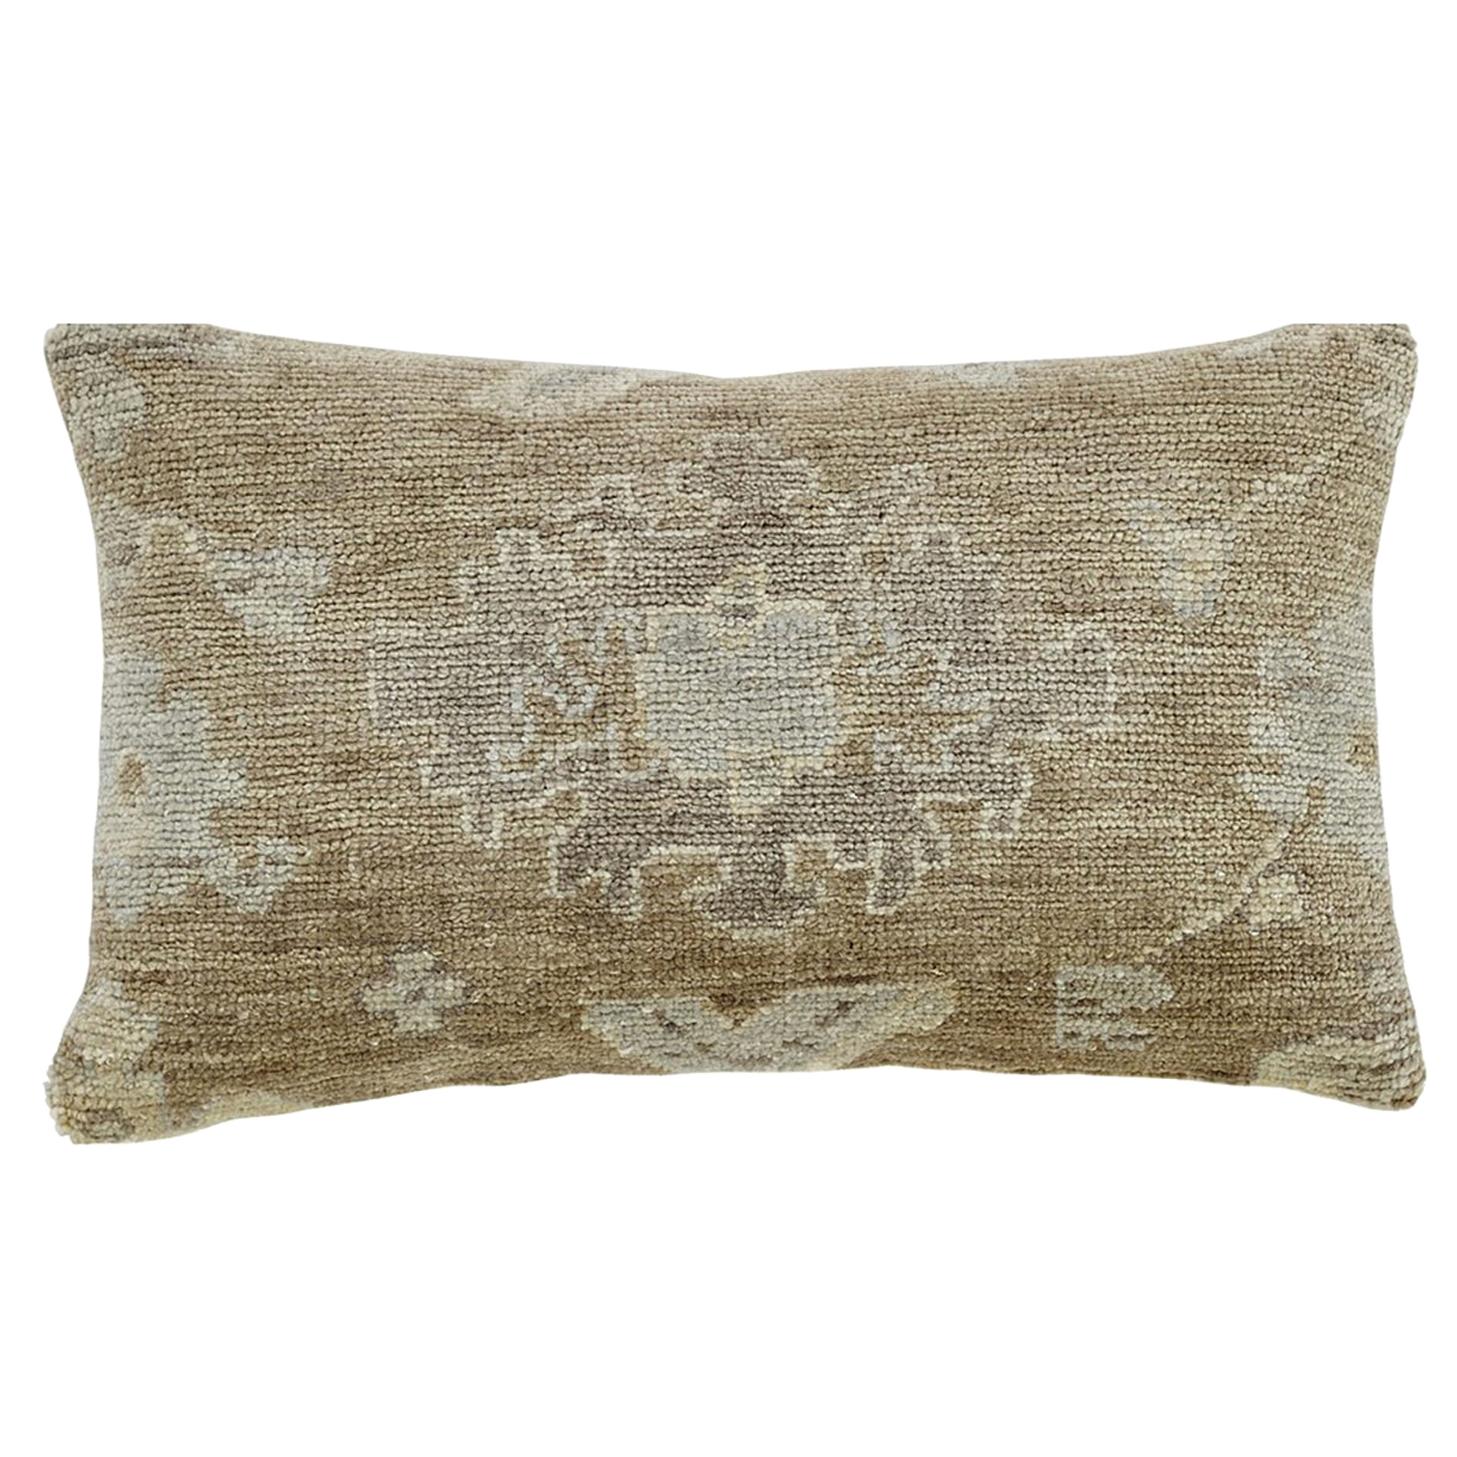 Modern Decorative Golden/Coffee Throw Pillow For Sale